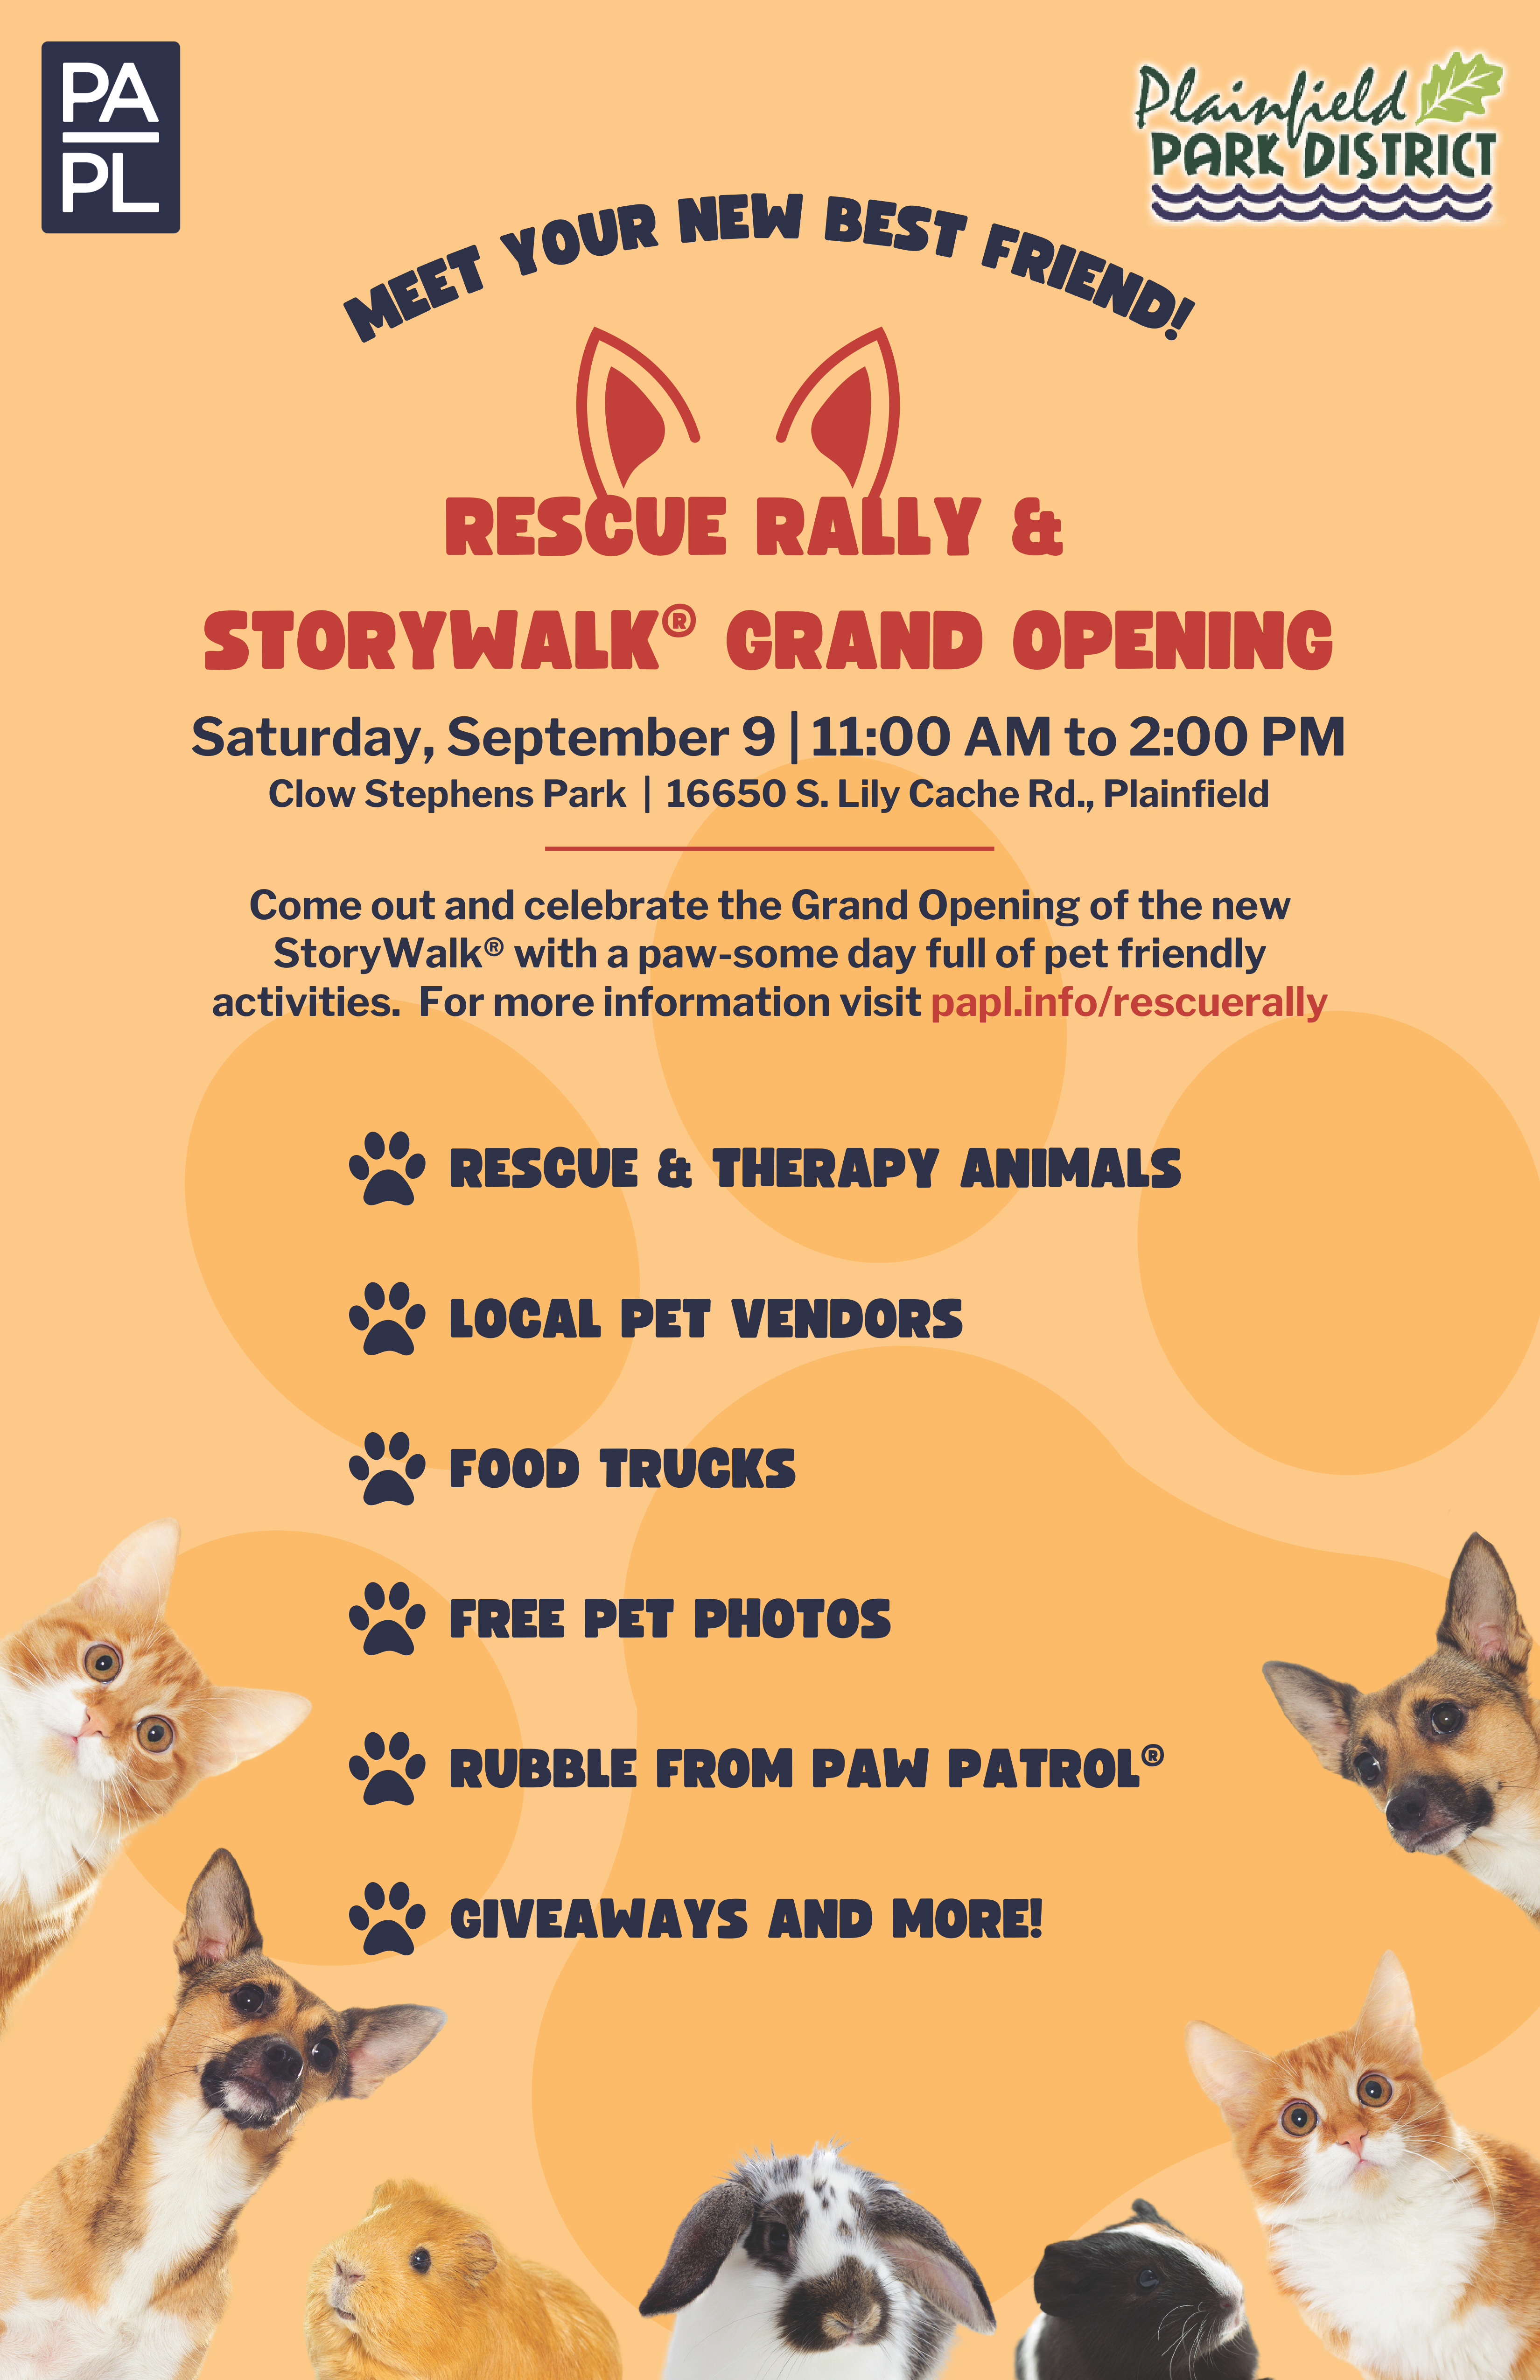 A group of cats, dogs, guinea pigs and a rabbit inviting everybody to Rescue Rally